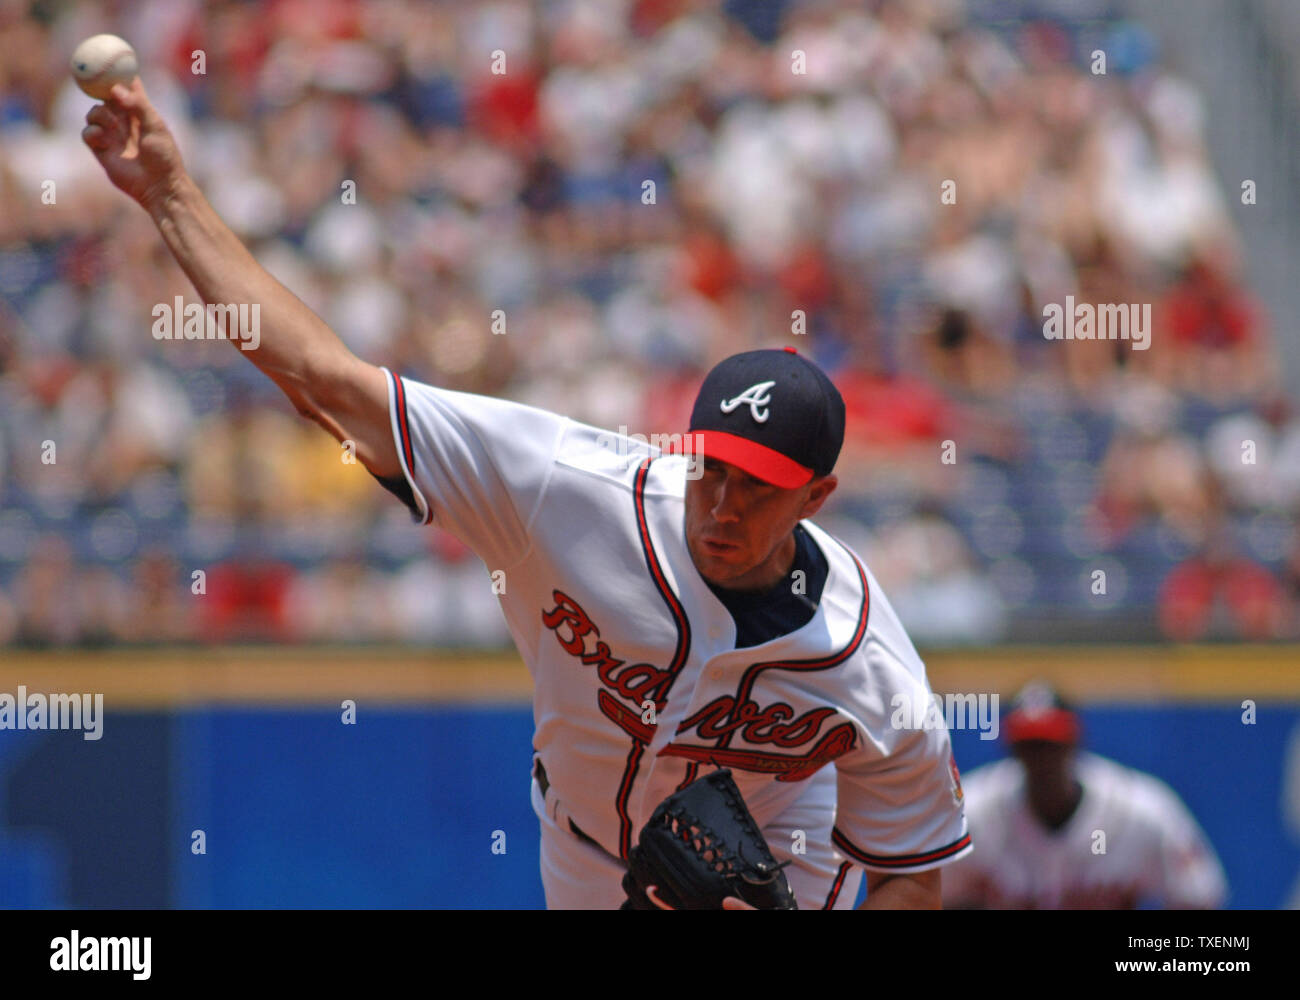 Atlanta Braves starting pitcher Lance Cormier throws against the visiting Boston Red Sox in the first inning June 17, 2006, in Atlanta's Turner Field.  The Red Sox defeated the Braves 5-3 (UPI Photo/John Dickerson) Stock Photo